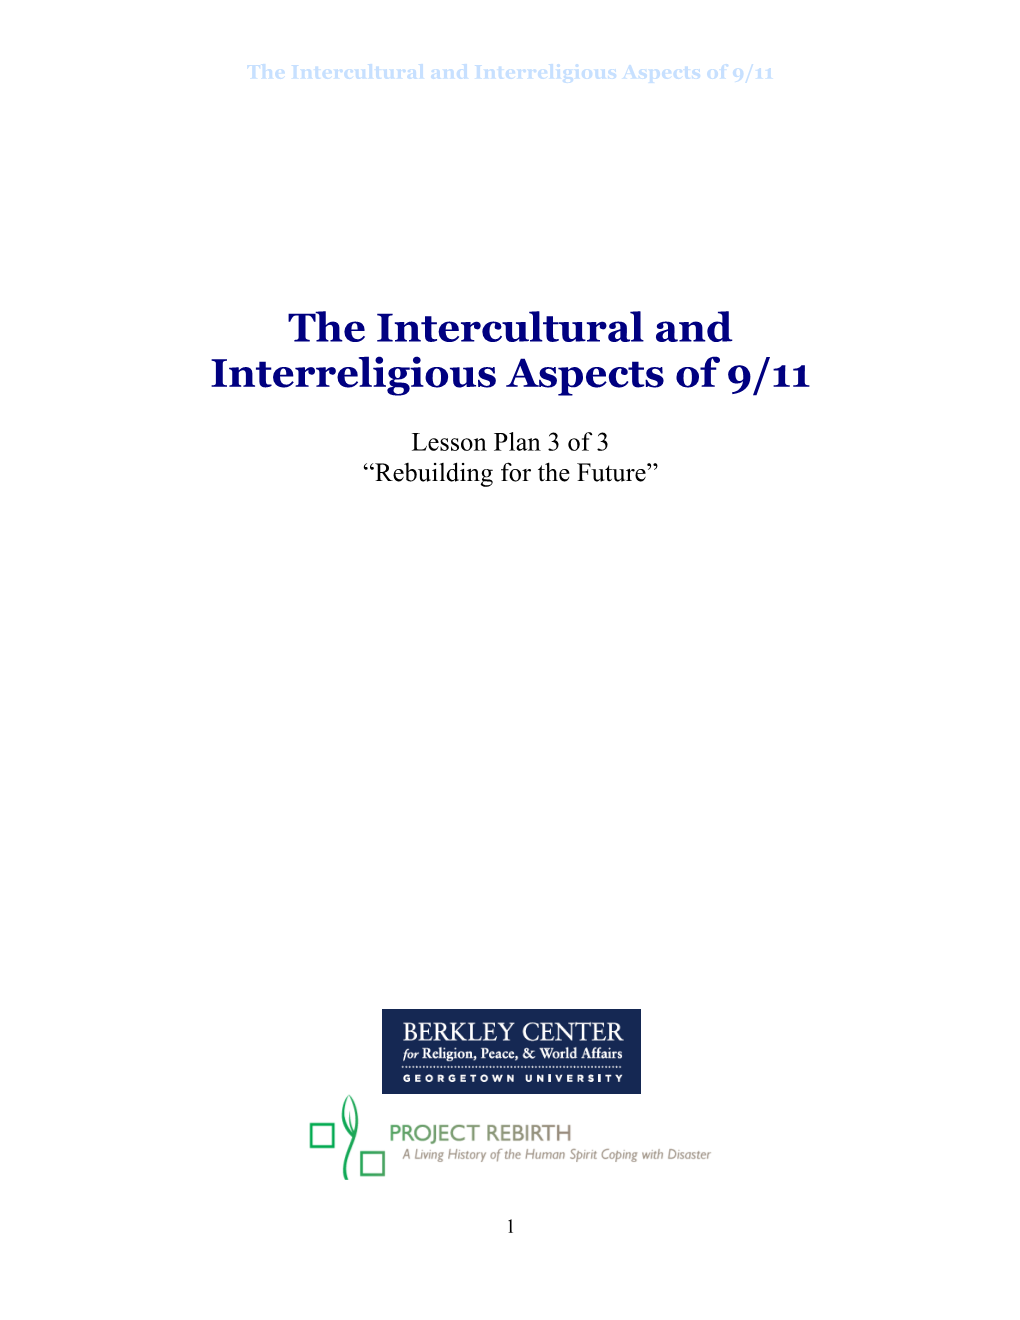 The Intercultural and Interreligious Aspects of 9/11